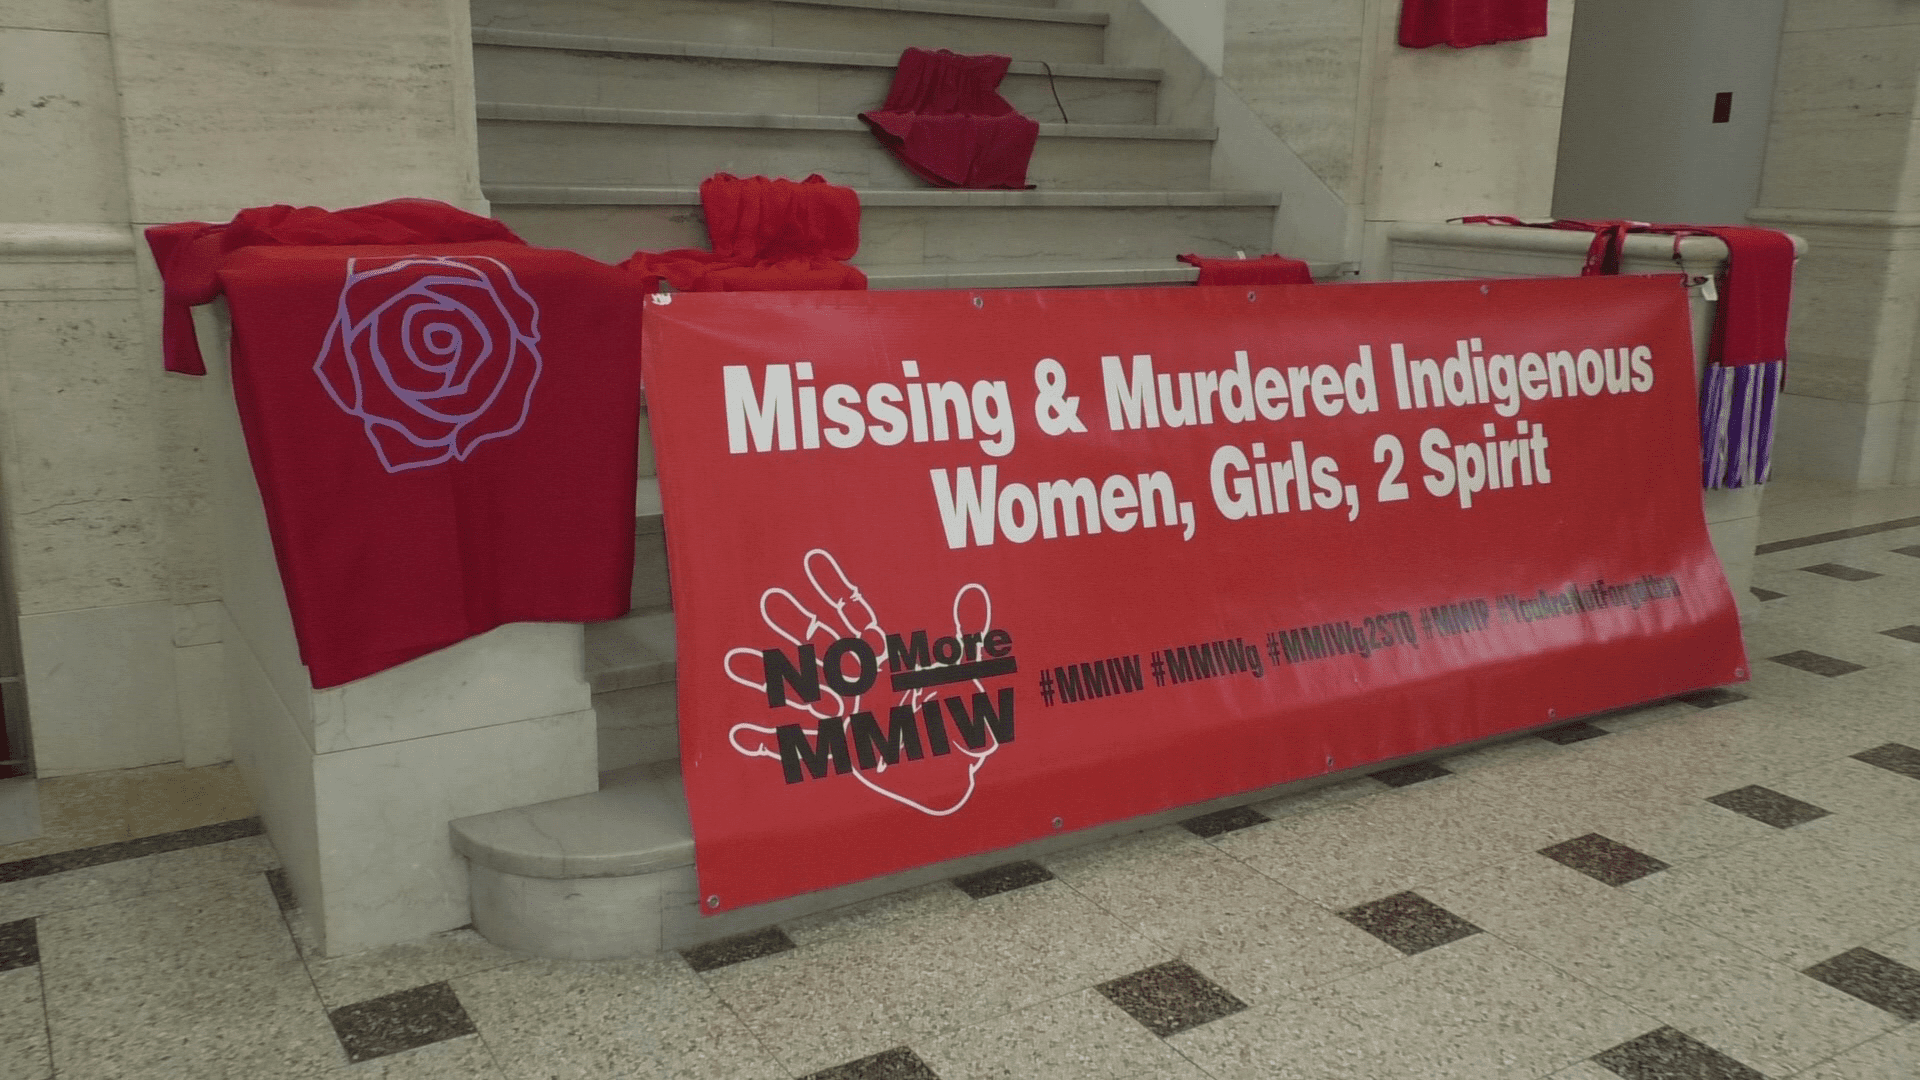 The Missing and Murdered Indigenous Women and Girls banner